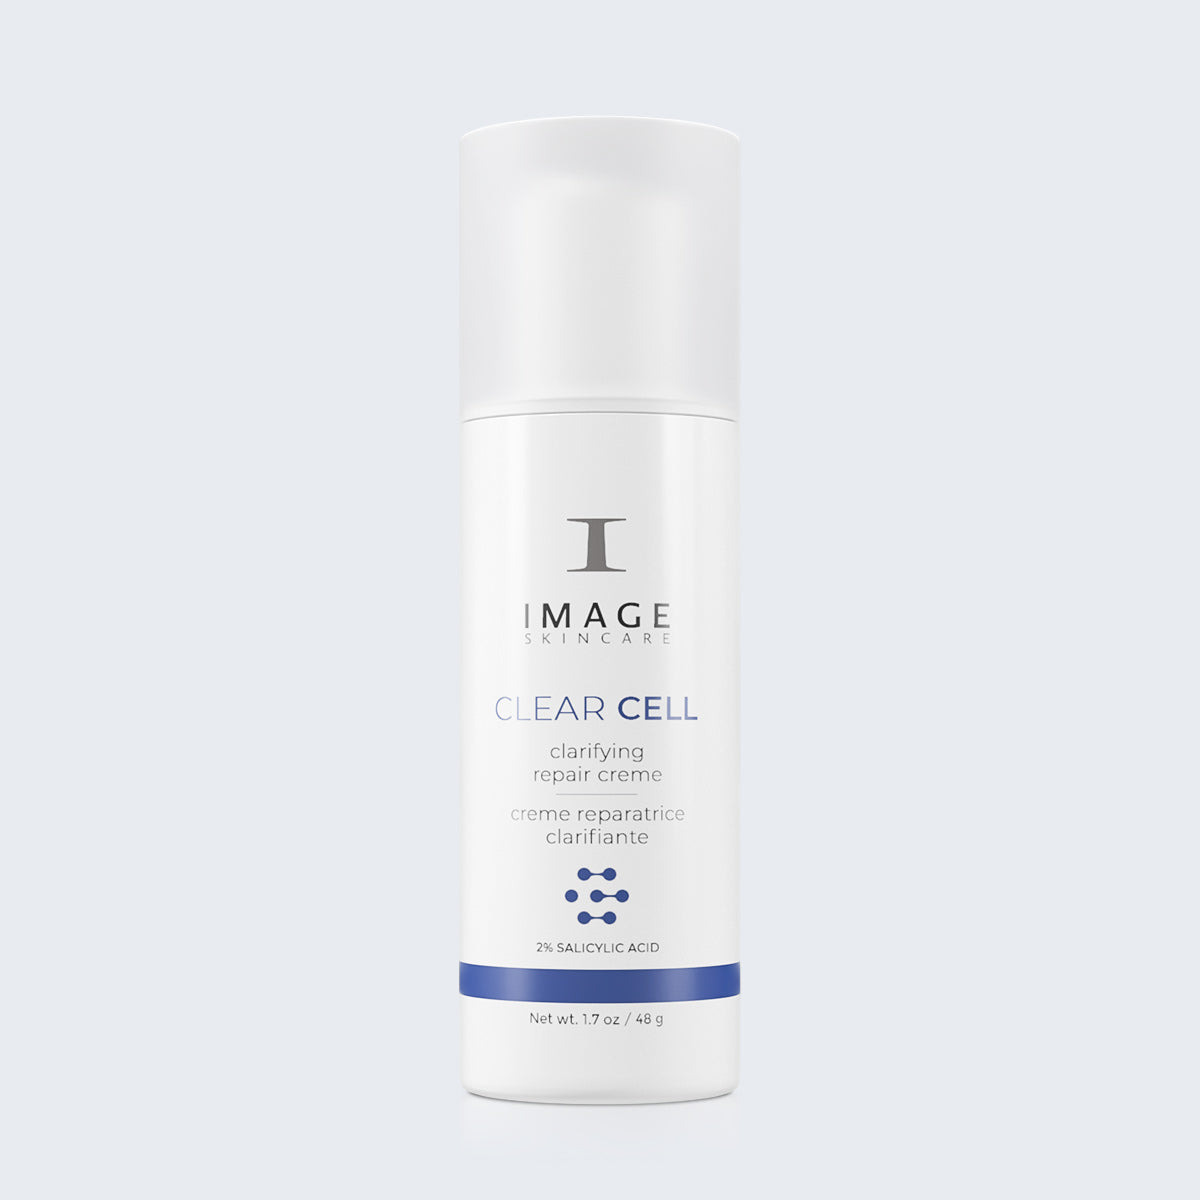 IMAGE Clear Cell Clarifying Repair Creme (1.7 oz)